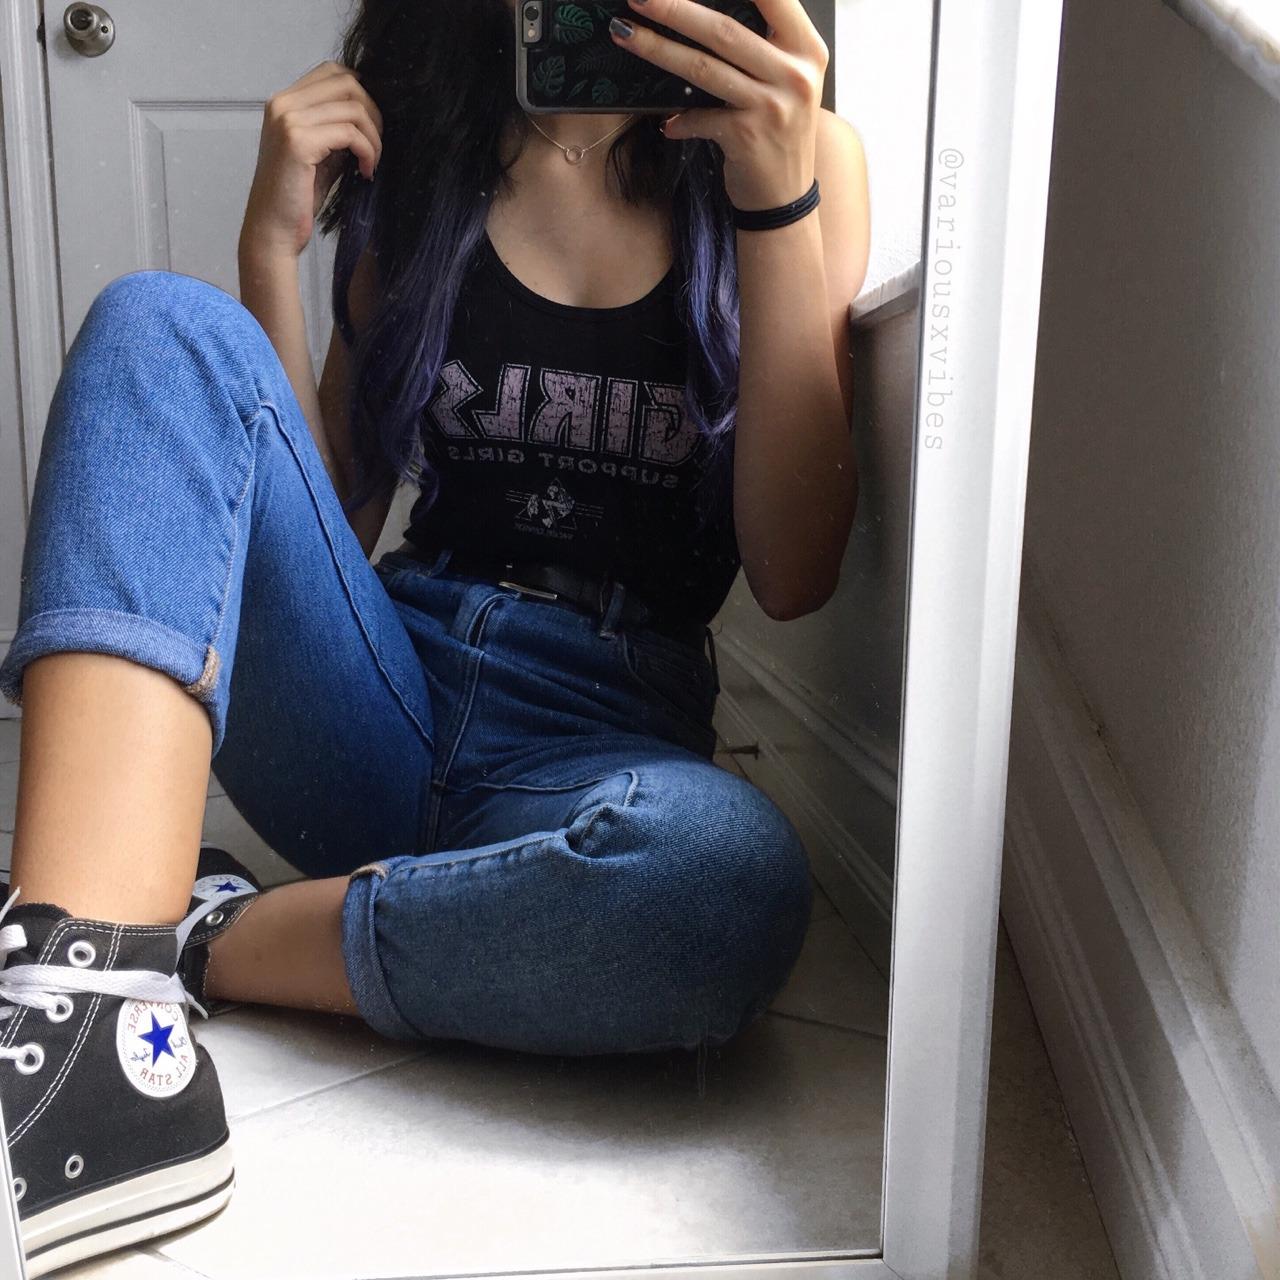 Mirror Selfie - Outfit Ideas From Tumblr: Outfit Ideas,  Teenage fashion,  Cute Tumblr Outfits  